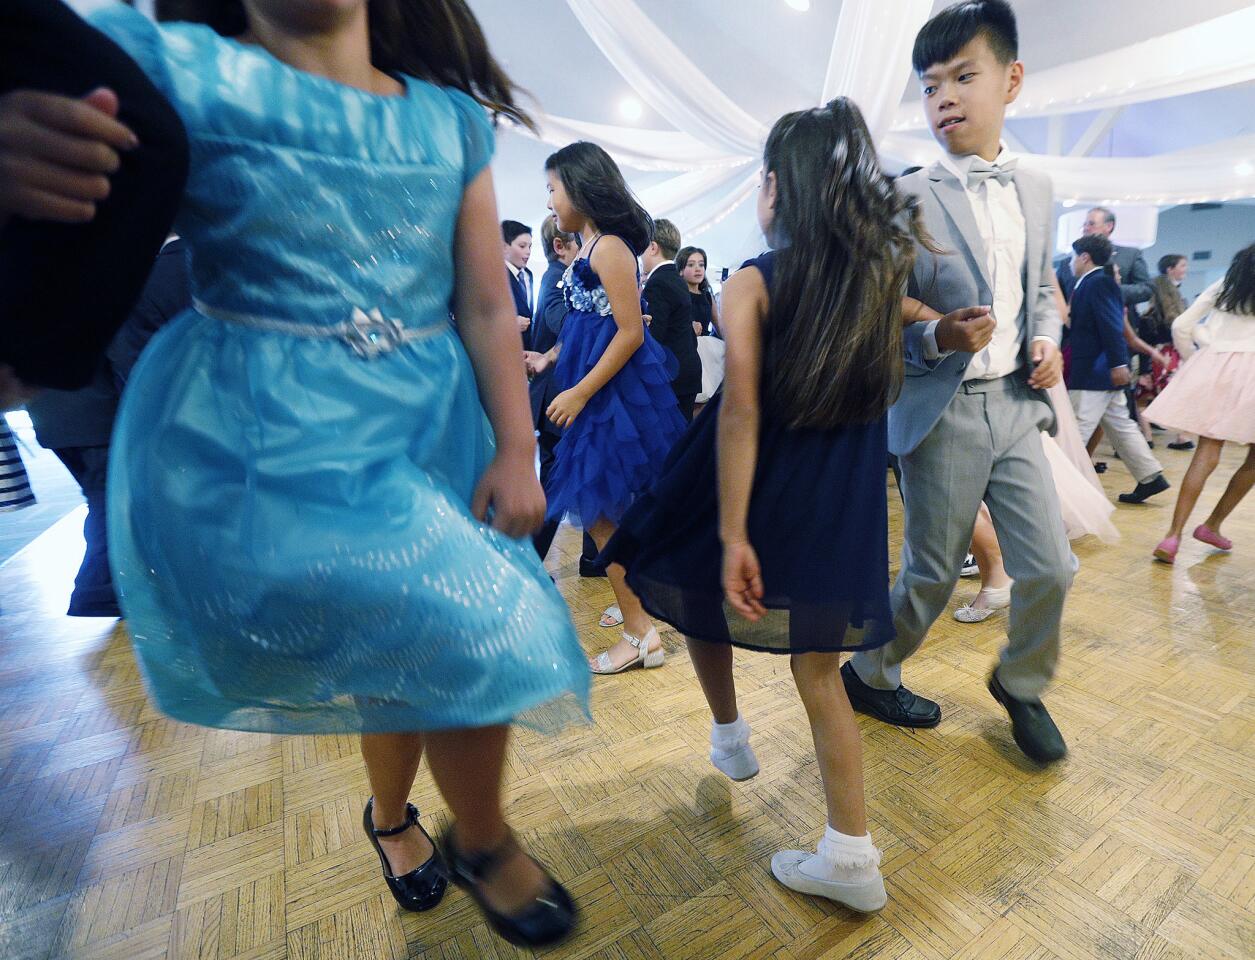 Sofi Aslanian, 9, of La Canada Flintridge, dances with Caden Ho, 10, of La Canada Flintridge as they learn the Mexican Hat Dance at the first basic introductory class of a basic etiquette class taught by Gollatz Cotillion at the La Canada Flintridge Country Club on Tuesday, September 25, 2018. Fourth-graders, where the boys must wear ties and the girls wear dresses, were instructed in the art of conversation, making eye contact, the handshake, basic dining skills and dancing with a partner.